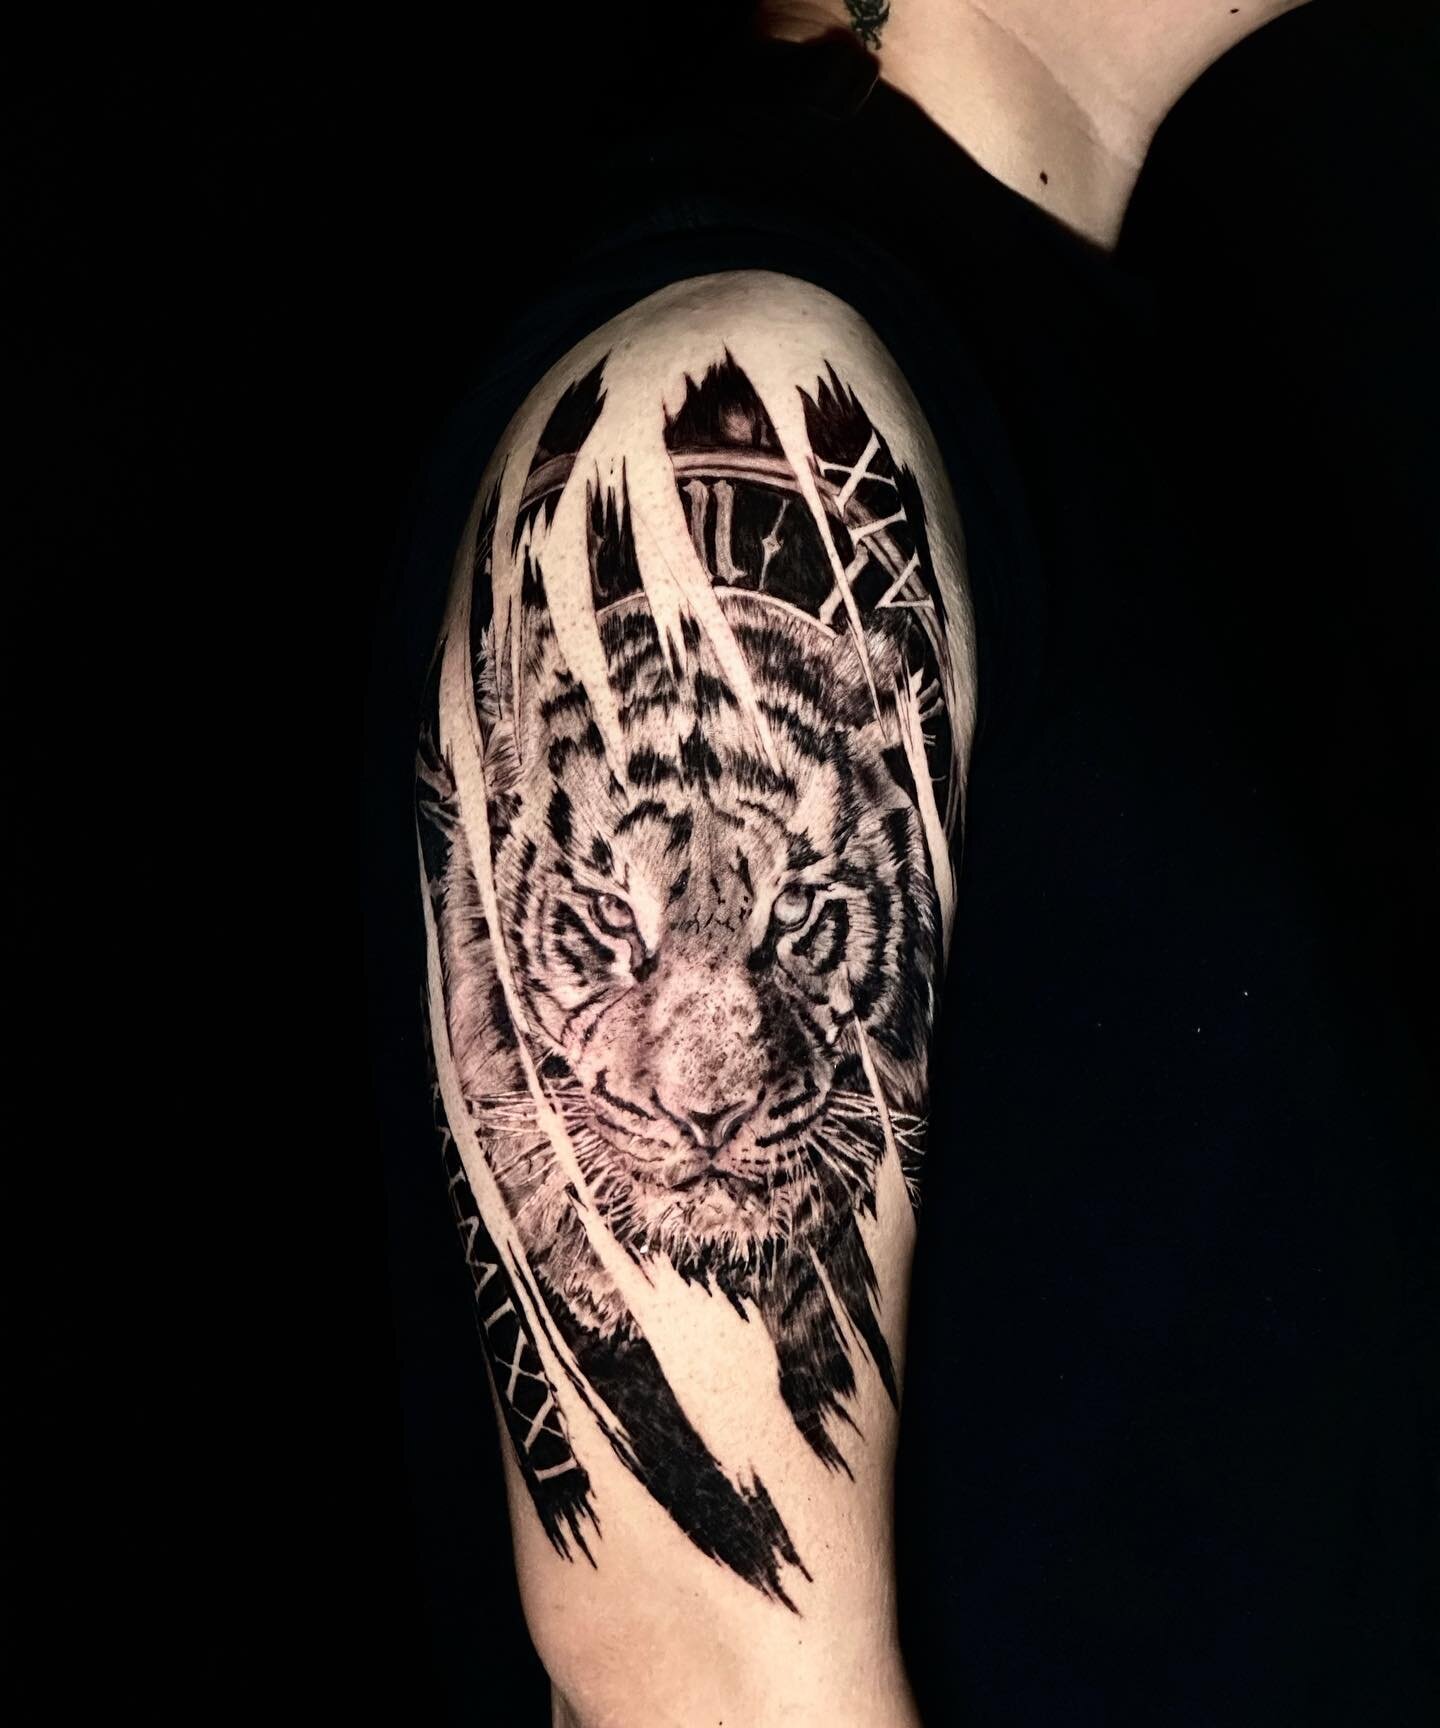 Tiger tattoo done in 9 hours. The skin is still peeling from the previous session. Can't wait to see you in the next projects. Thabk you